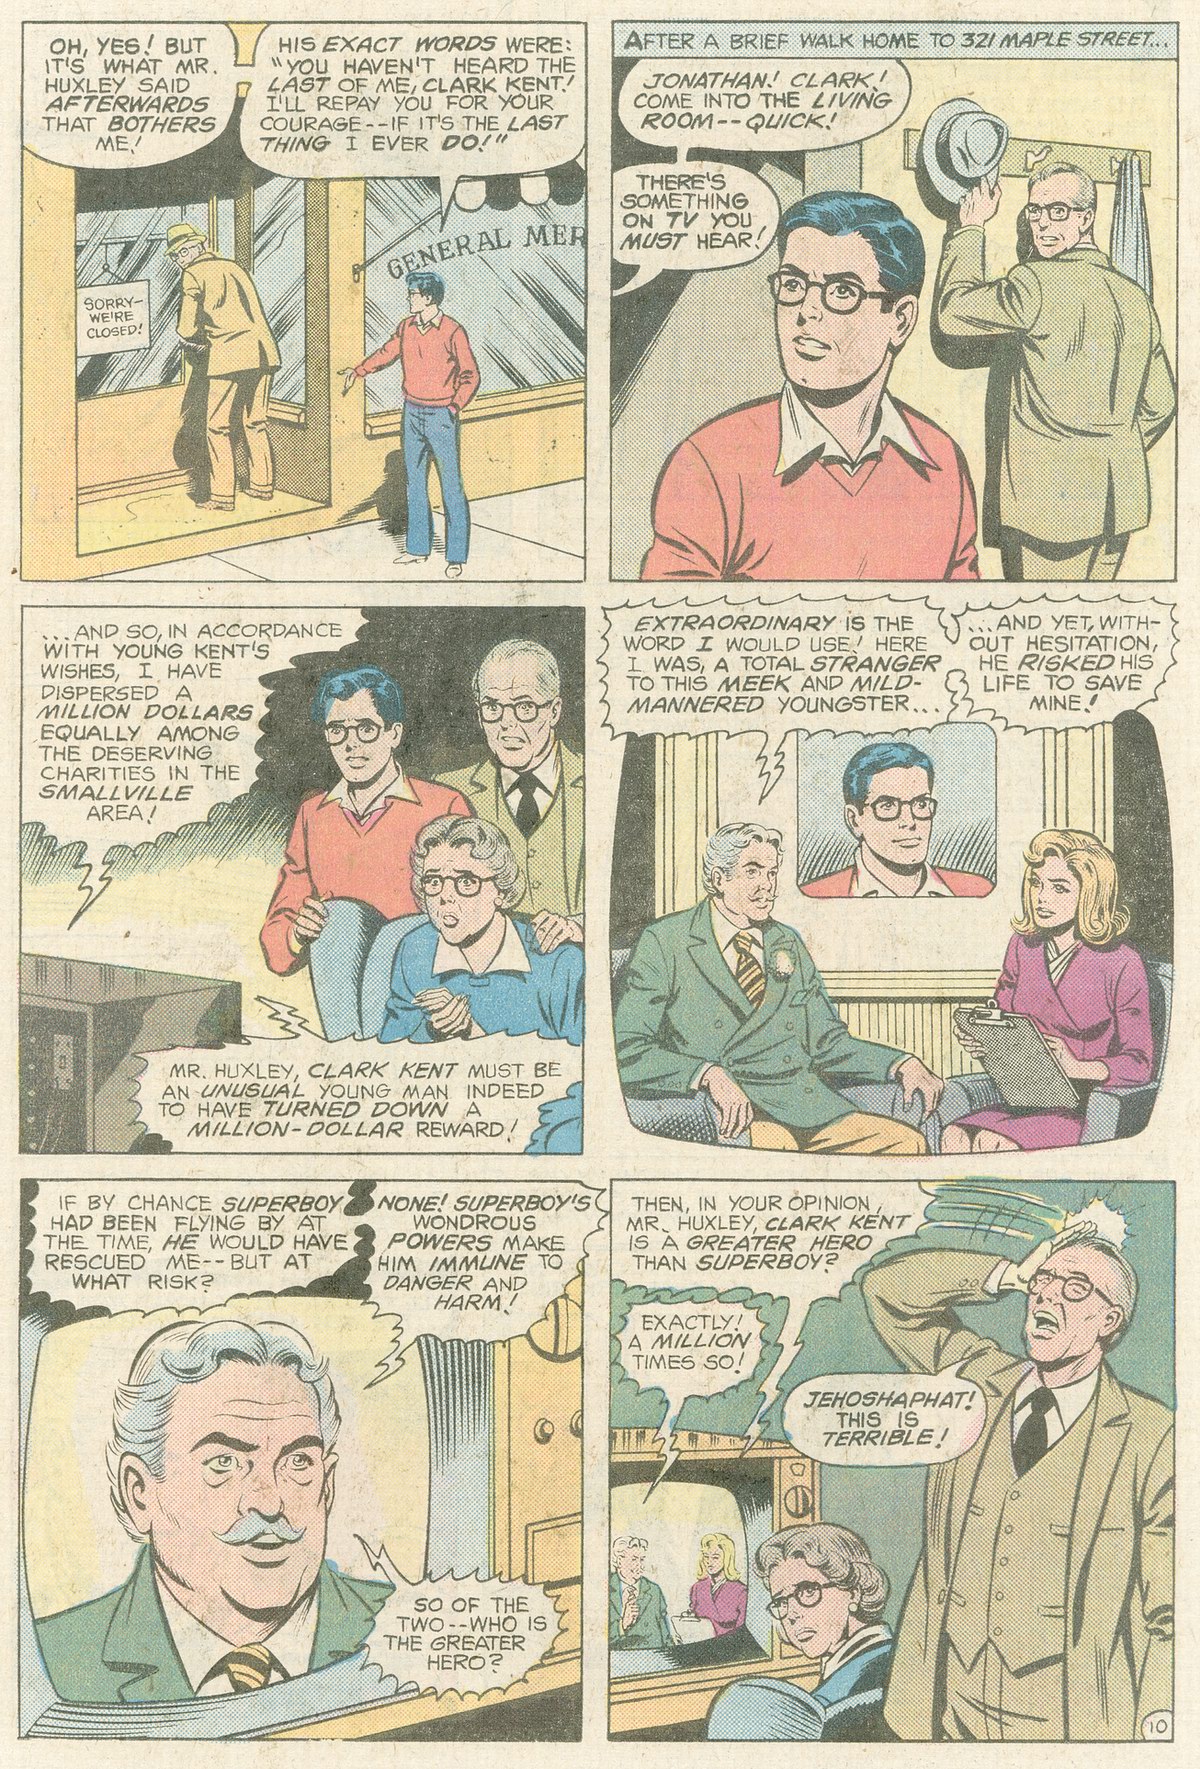 The New Adventures of Superboy 12 Page 10